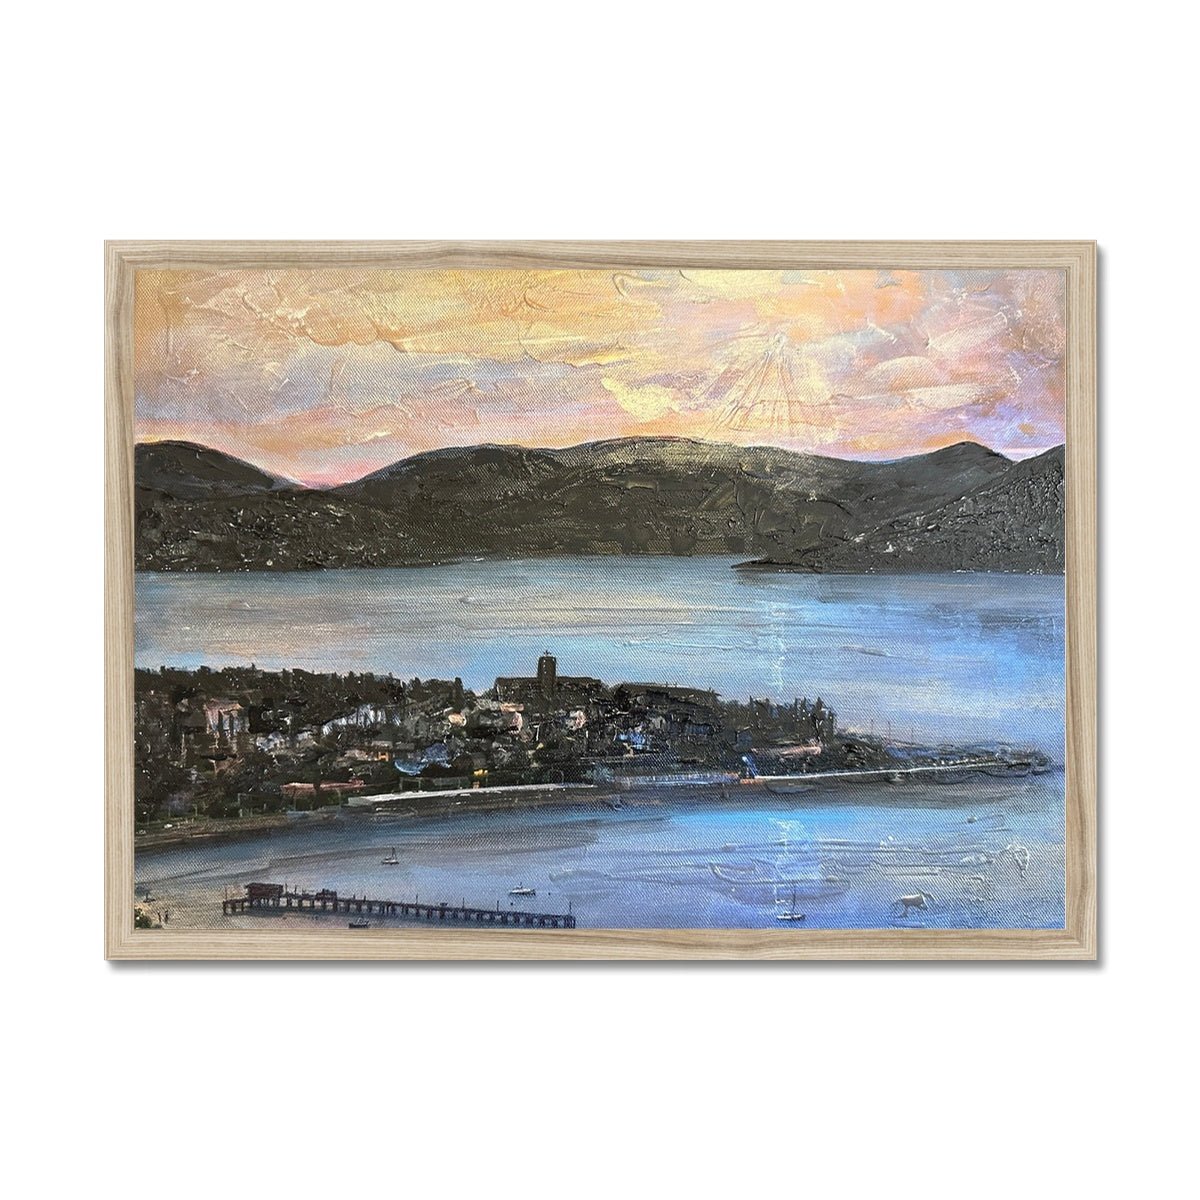 From Lyle Hill Painting | Framed Prints From Scotland-Framed Prints-River Clyde Art Gallery-A2 Landscape-Natural Frame-Paintings, Prints, Homeware, Art Gifts From Scotland By Scottish Artist Kevin Hunter